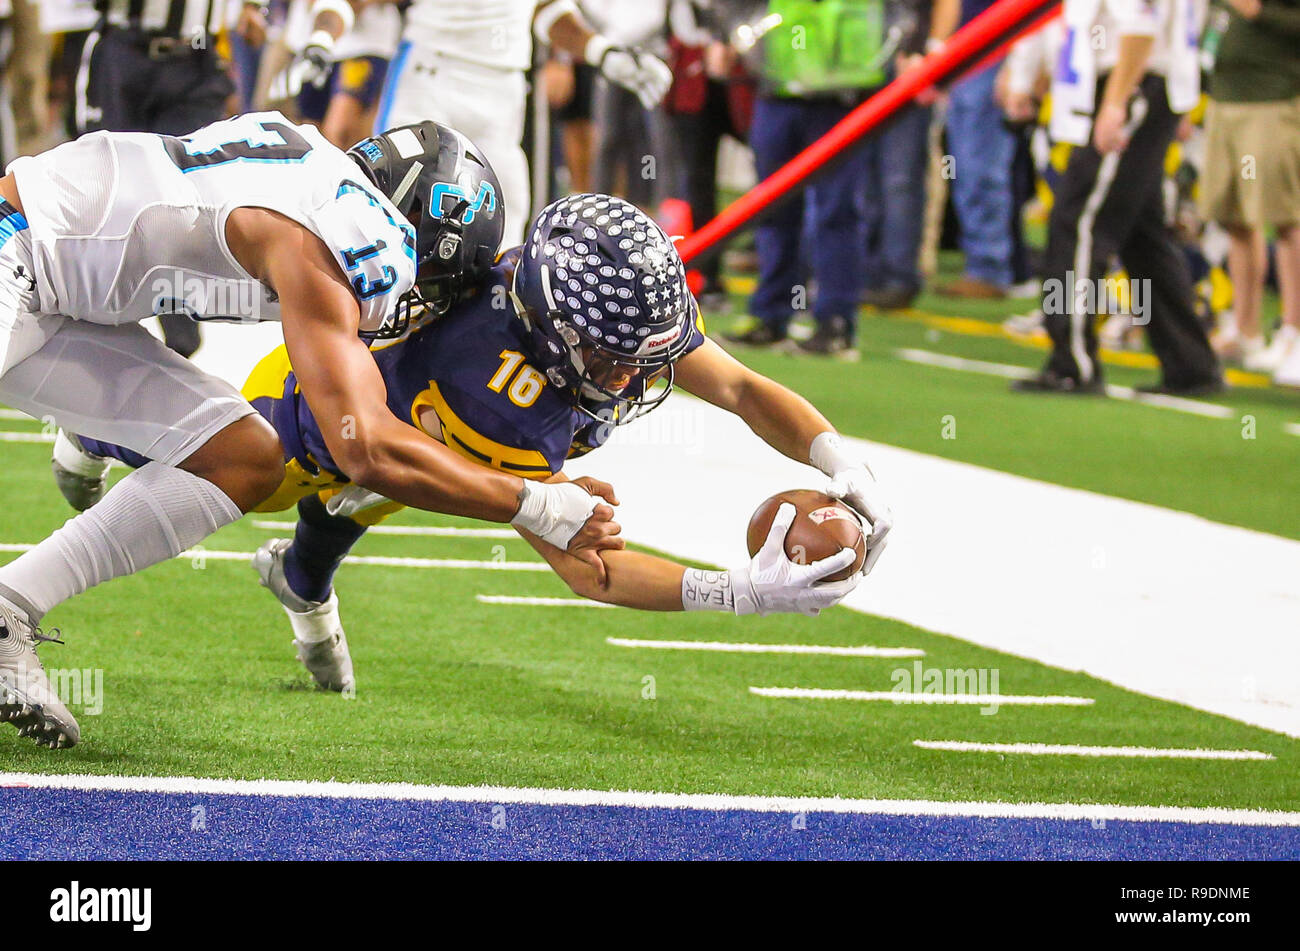 Arlington, Texas, USA. 12th Dec, 2018. Highland Park's Finnegan Corwin #16 dives for a touchdown during the UIL Texas 5A D1 state championships football game between the Highland Park Scots and the Shadow Creek Sharks at AT&T Stadium in Arlington, Texas. Kyle Okita/CSM/Alamy Live News Stock Photo